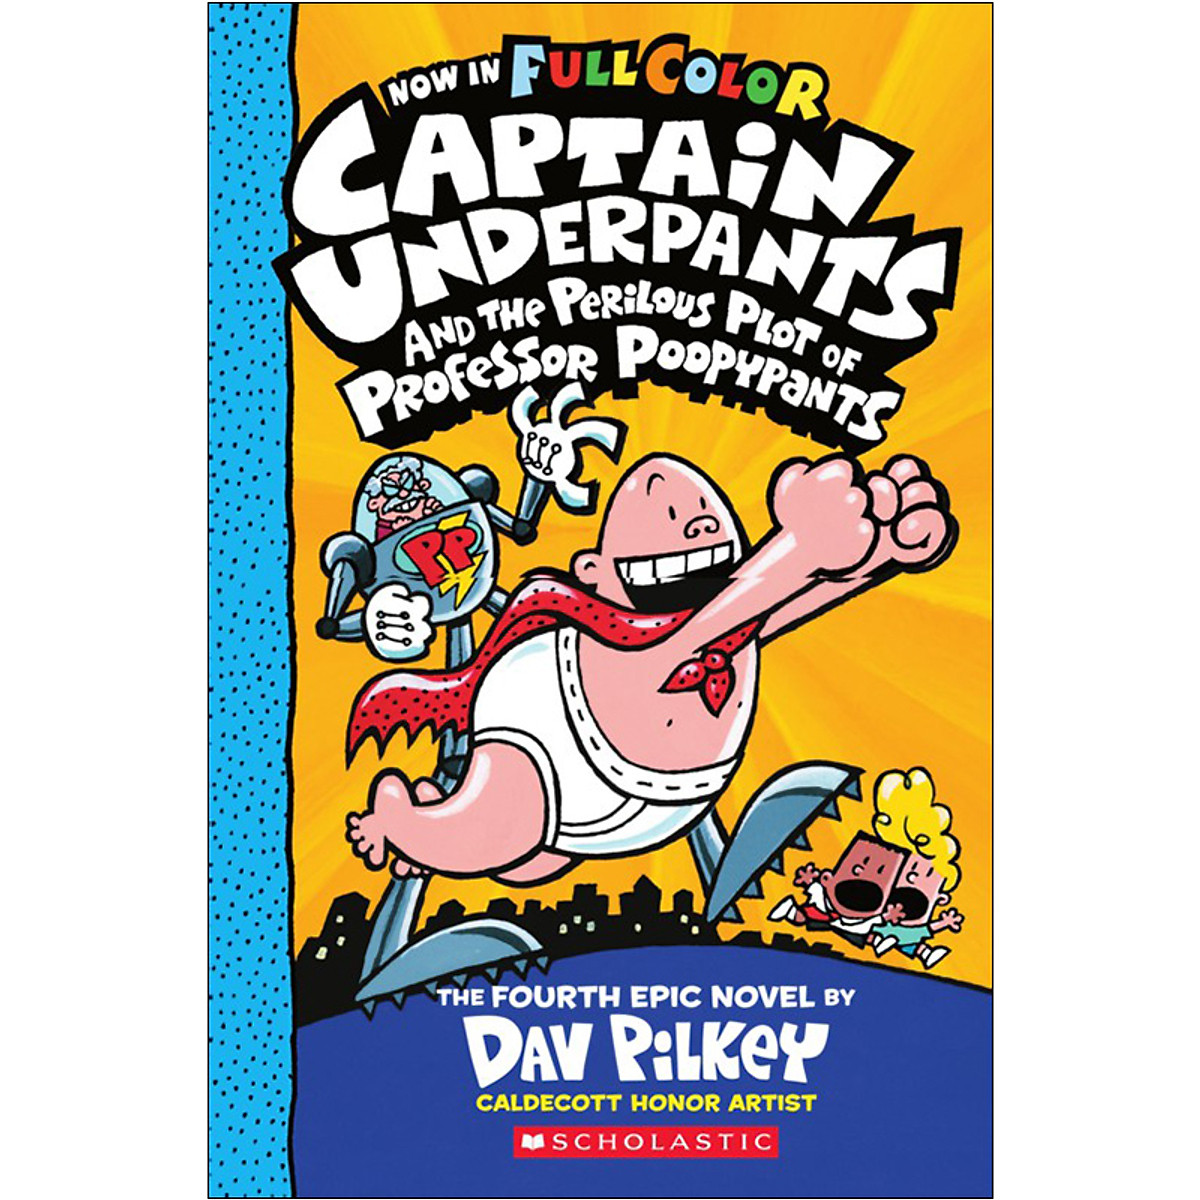 Captain Underpants and The Perilous Plot of Professor Poopypants, Volume 04 (Now in Full Color)